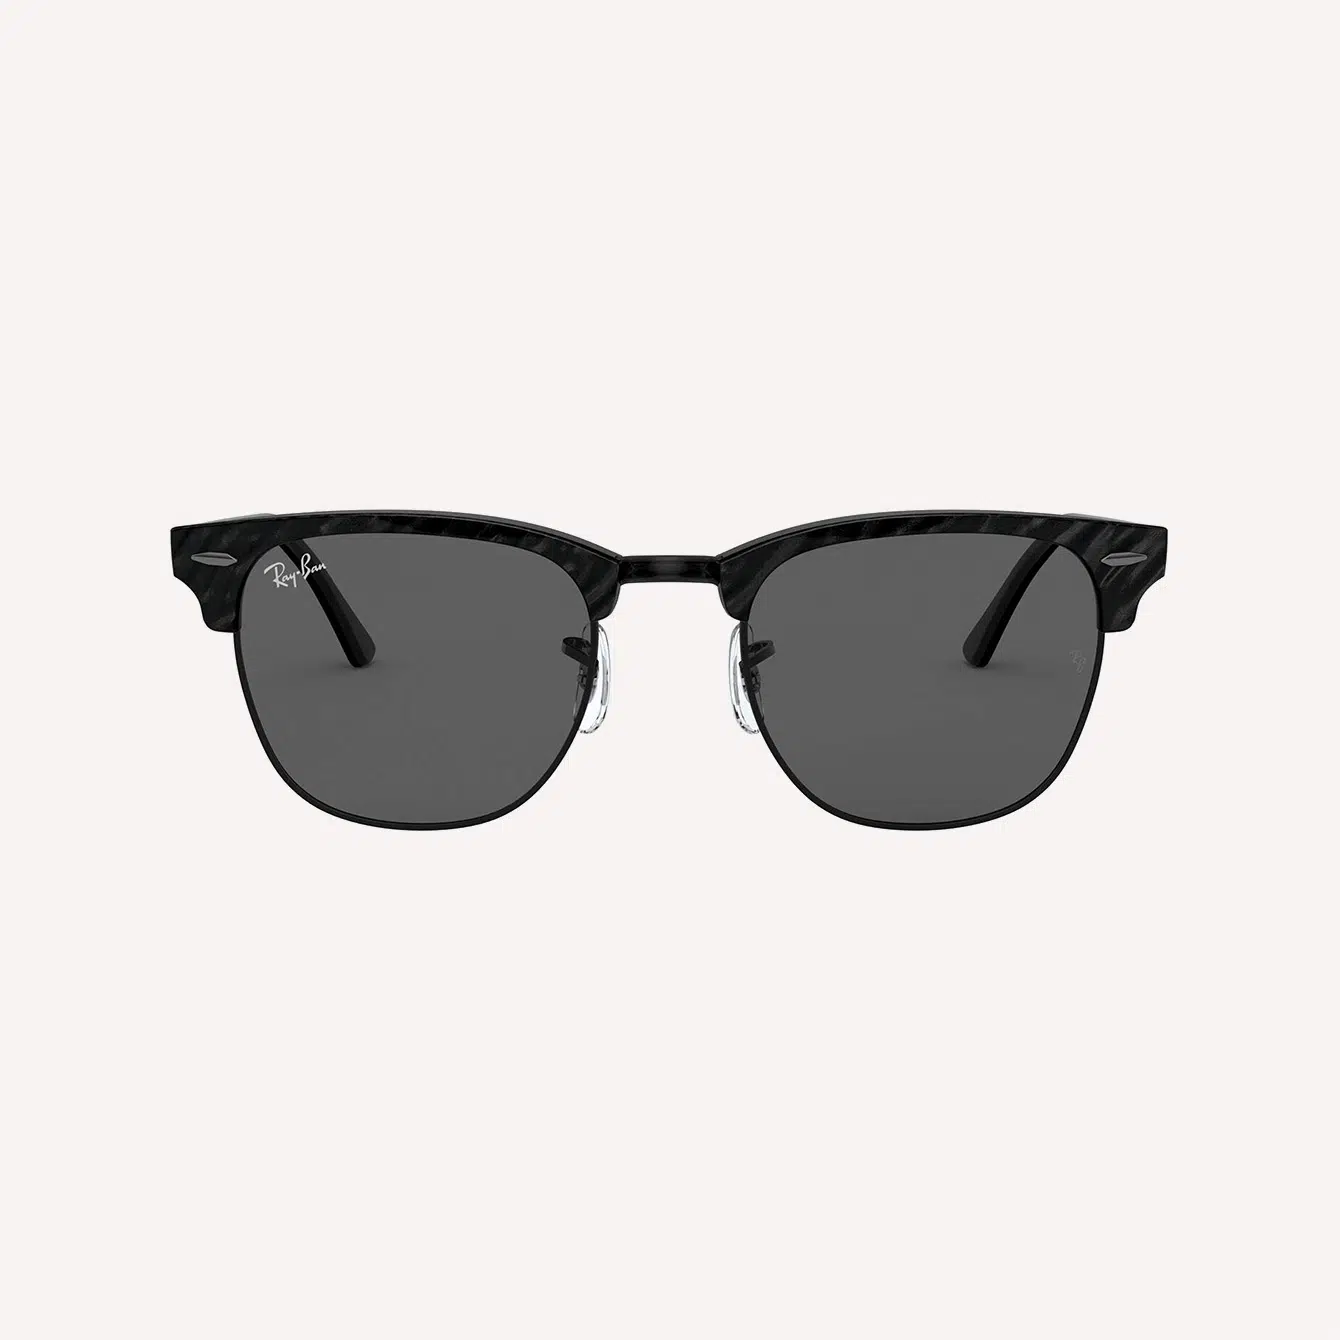 Ray Ban Rb3016 Clubmaster Square Sunglasses